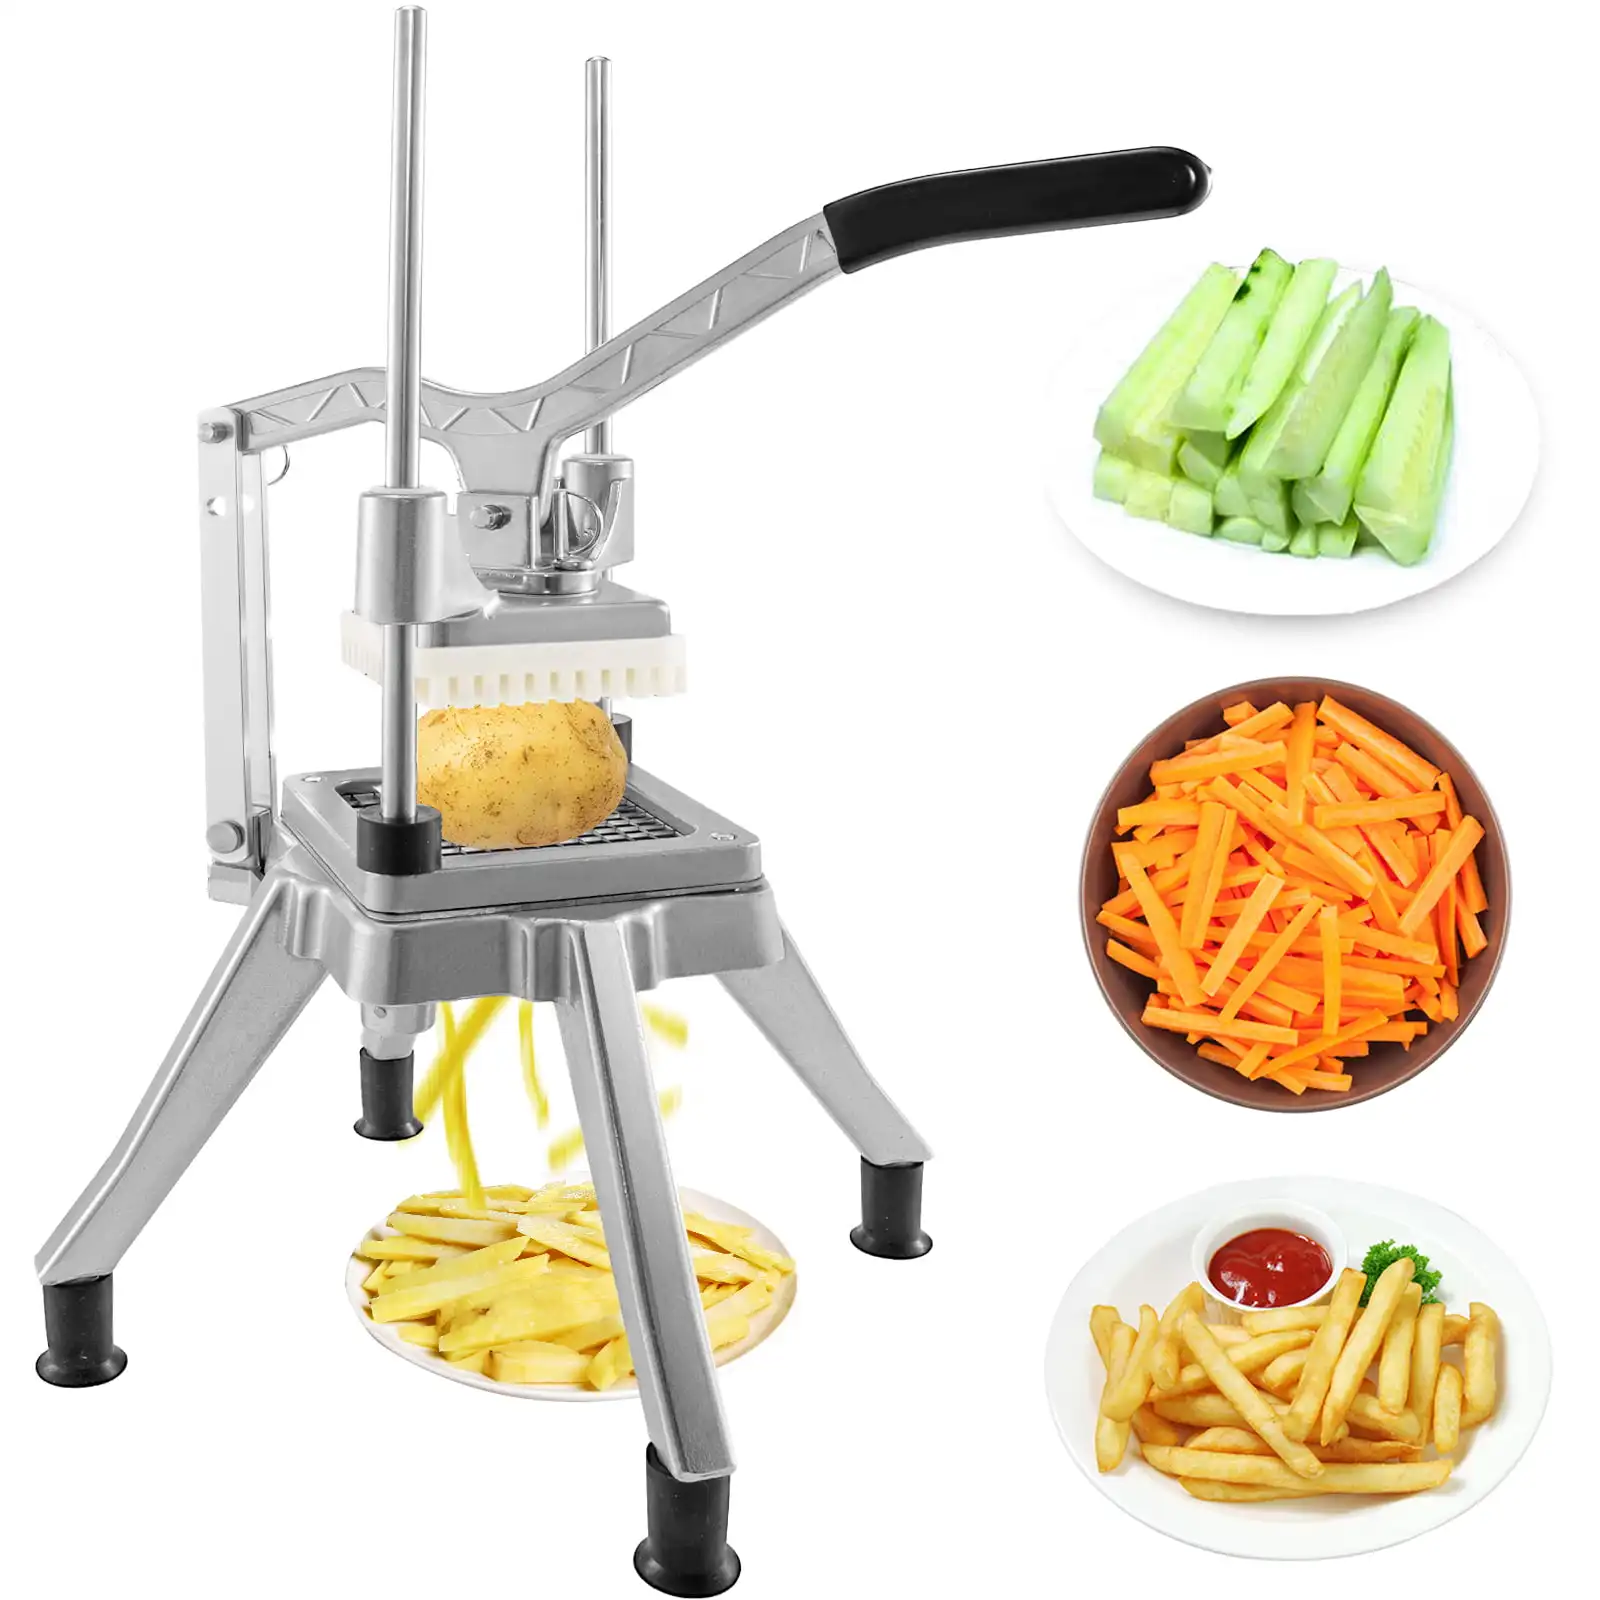 

NEW Commercial Vegetable Fruit Chopper 1/4in Blade Heavy Duty Professional Food Dicer Kattex French Fry Cutter Onion Slicer Stai